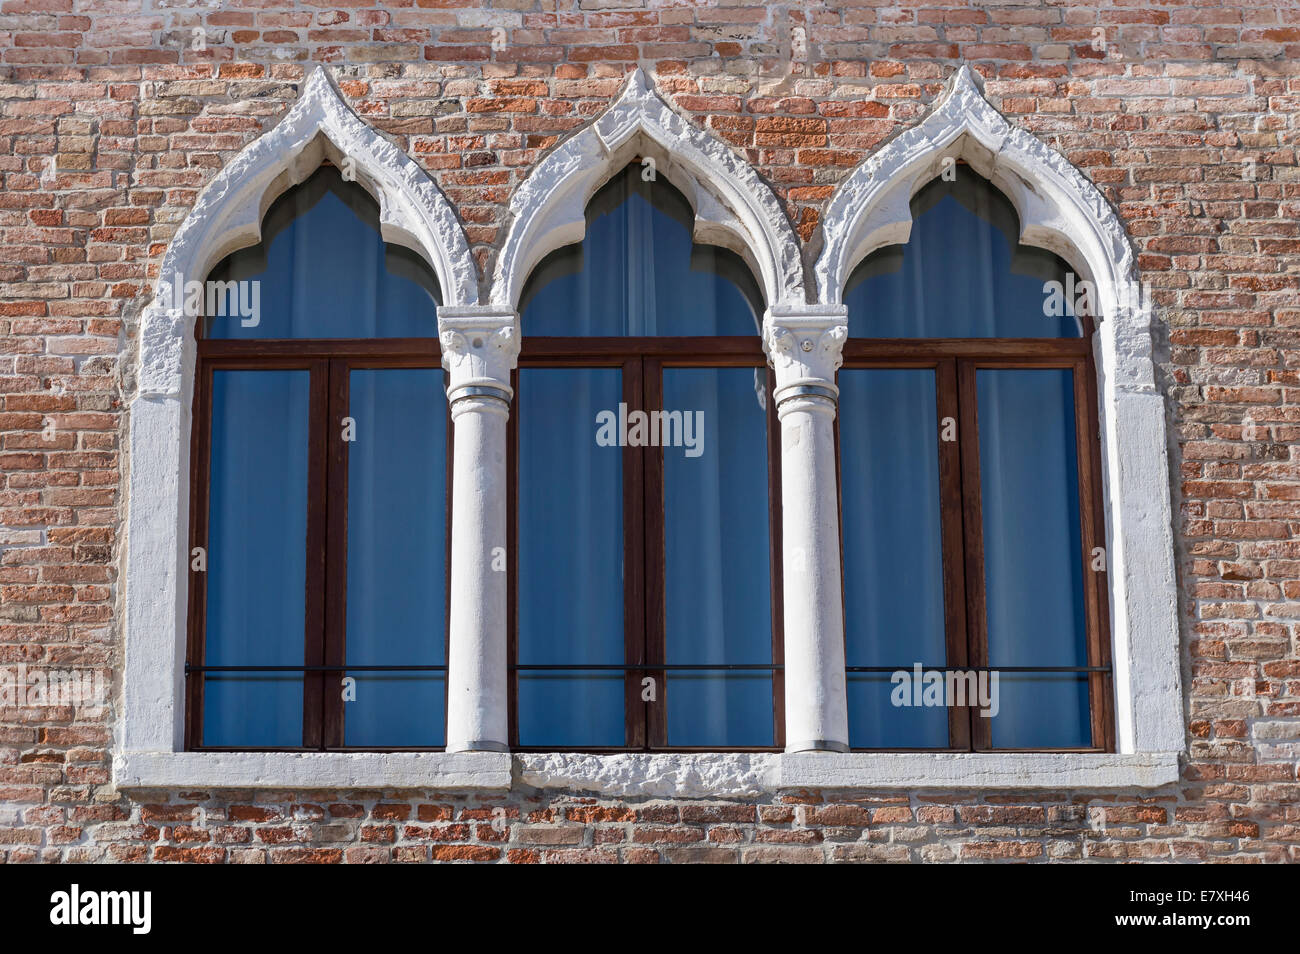 Trio of ancient arched windows typical of Venice Stock Photo